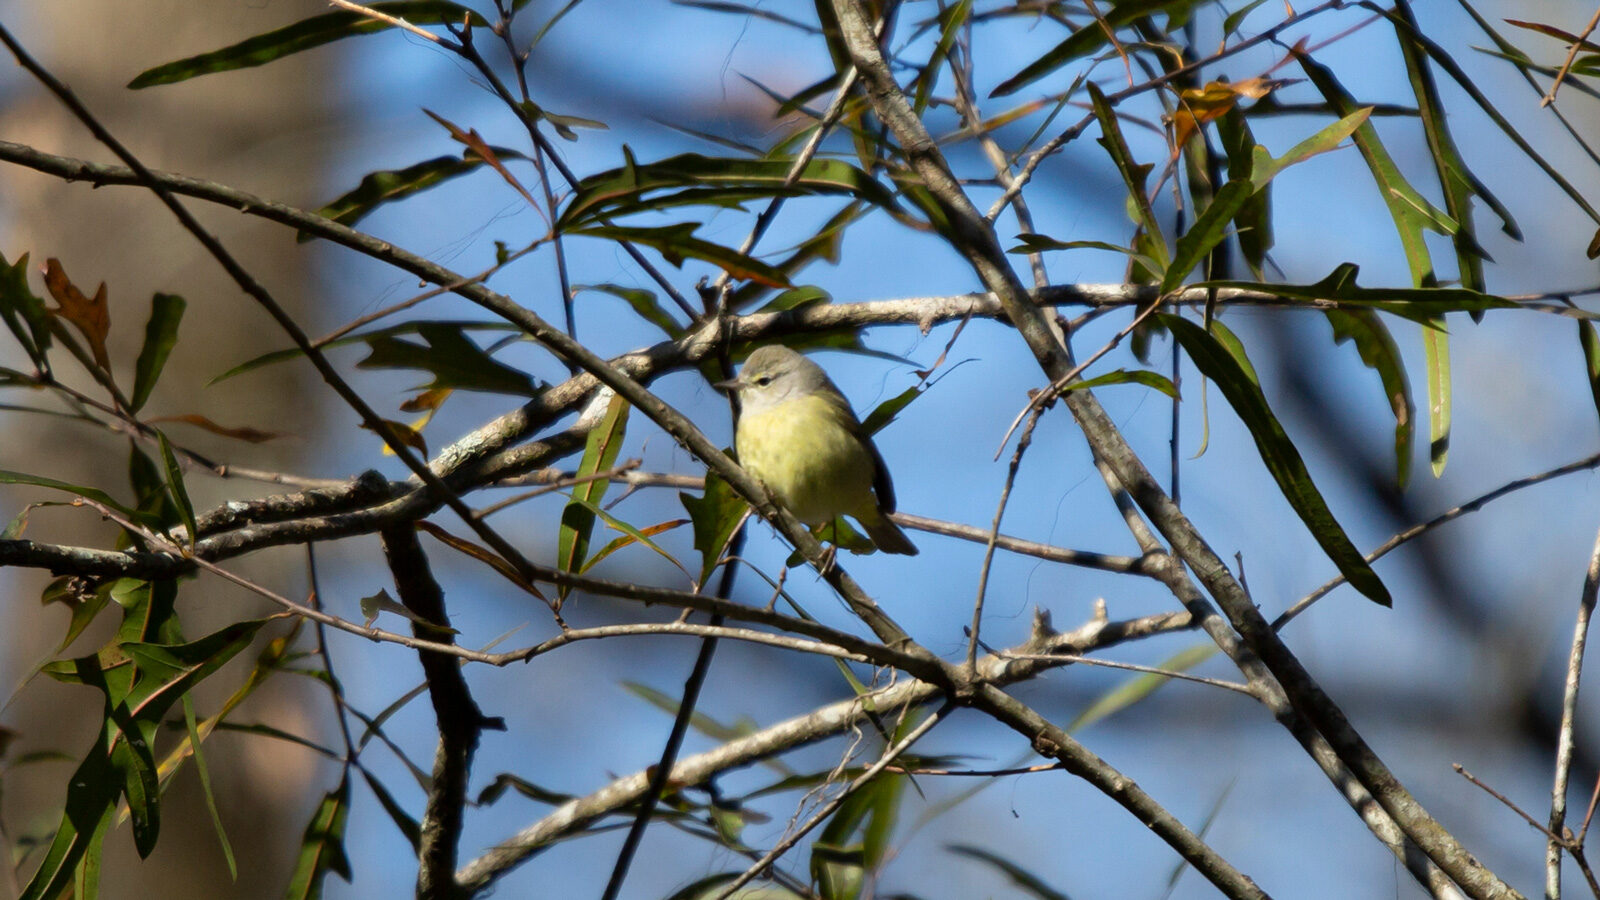 Immature orange-crowned warbler perched on a branch